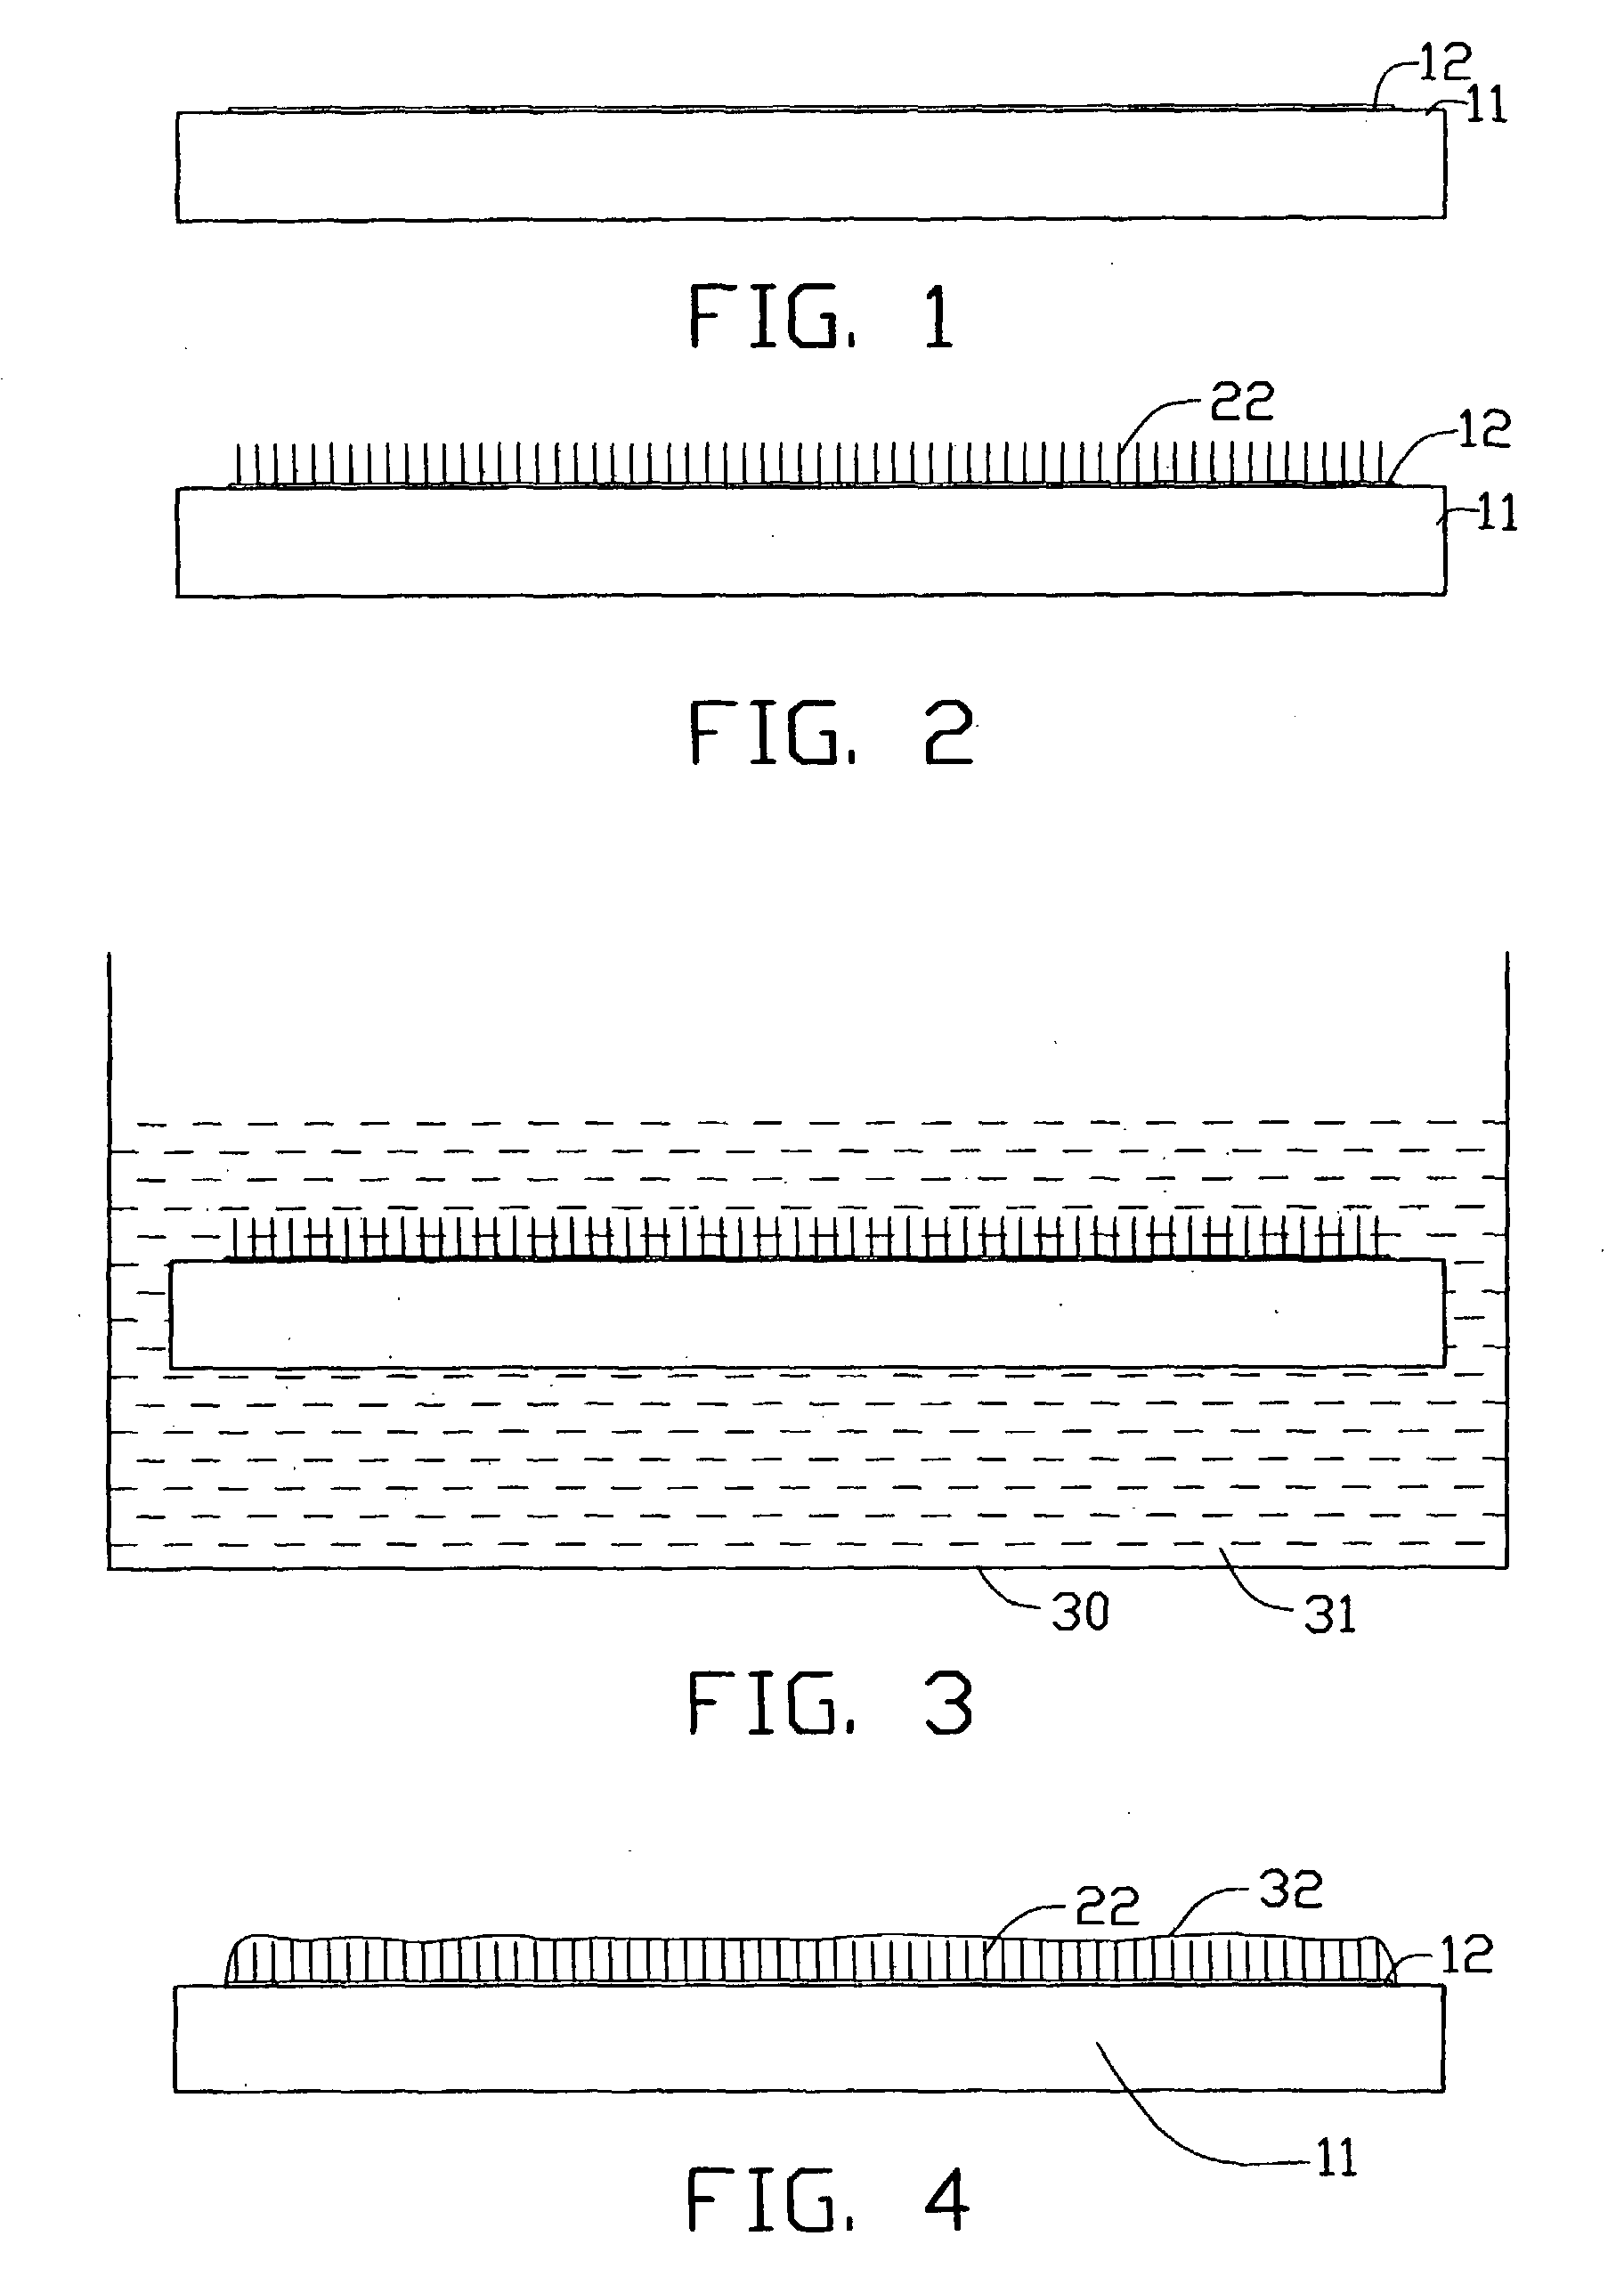 Thermal interface material and method for making same